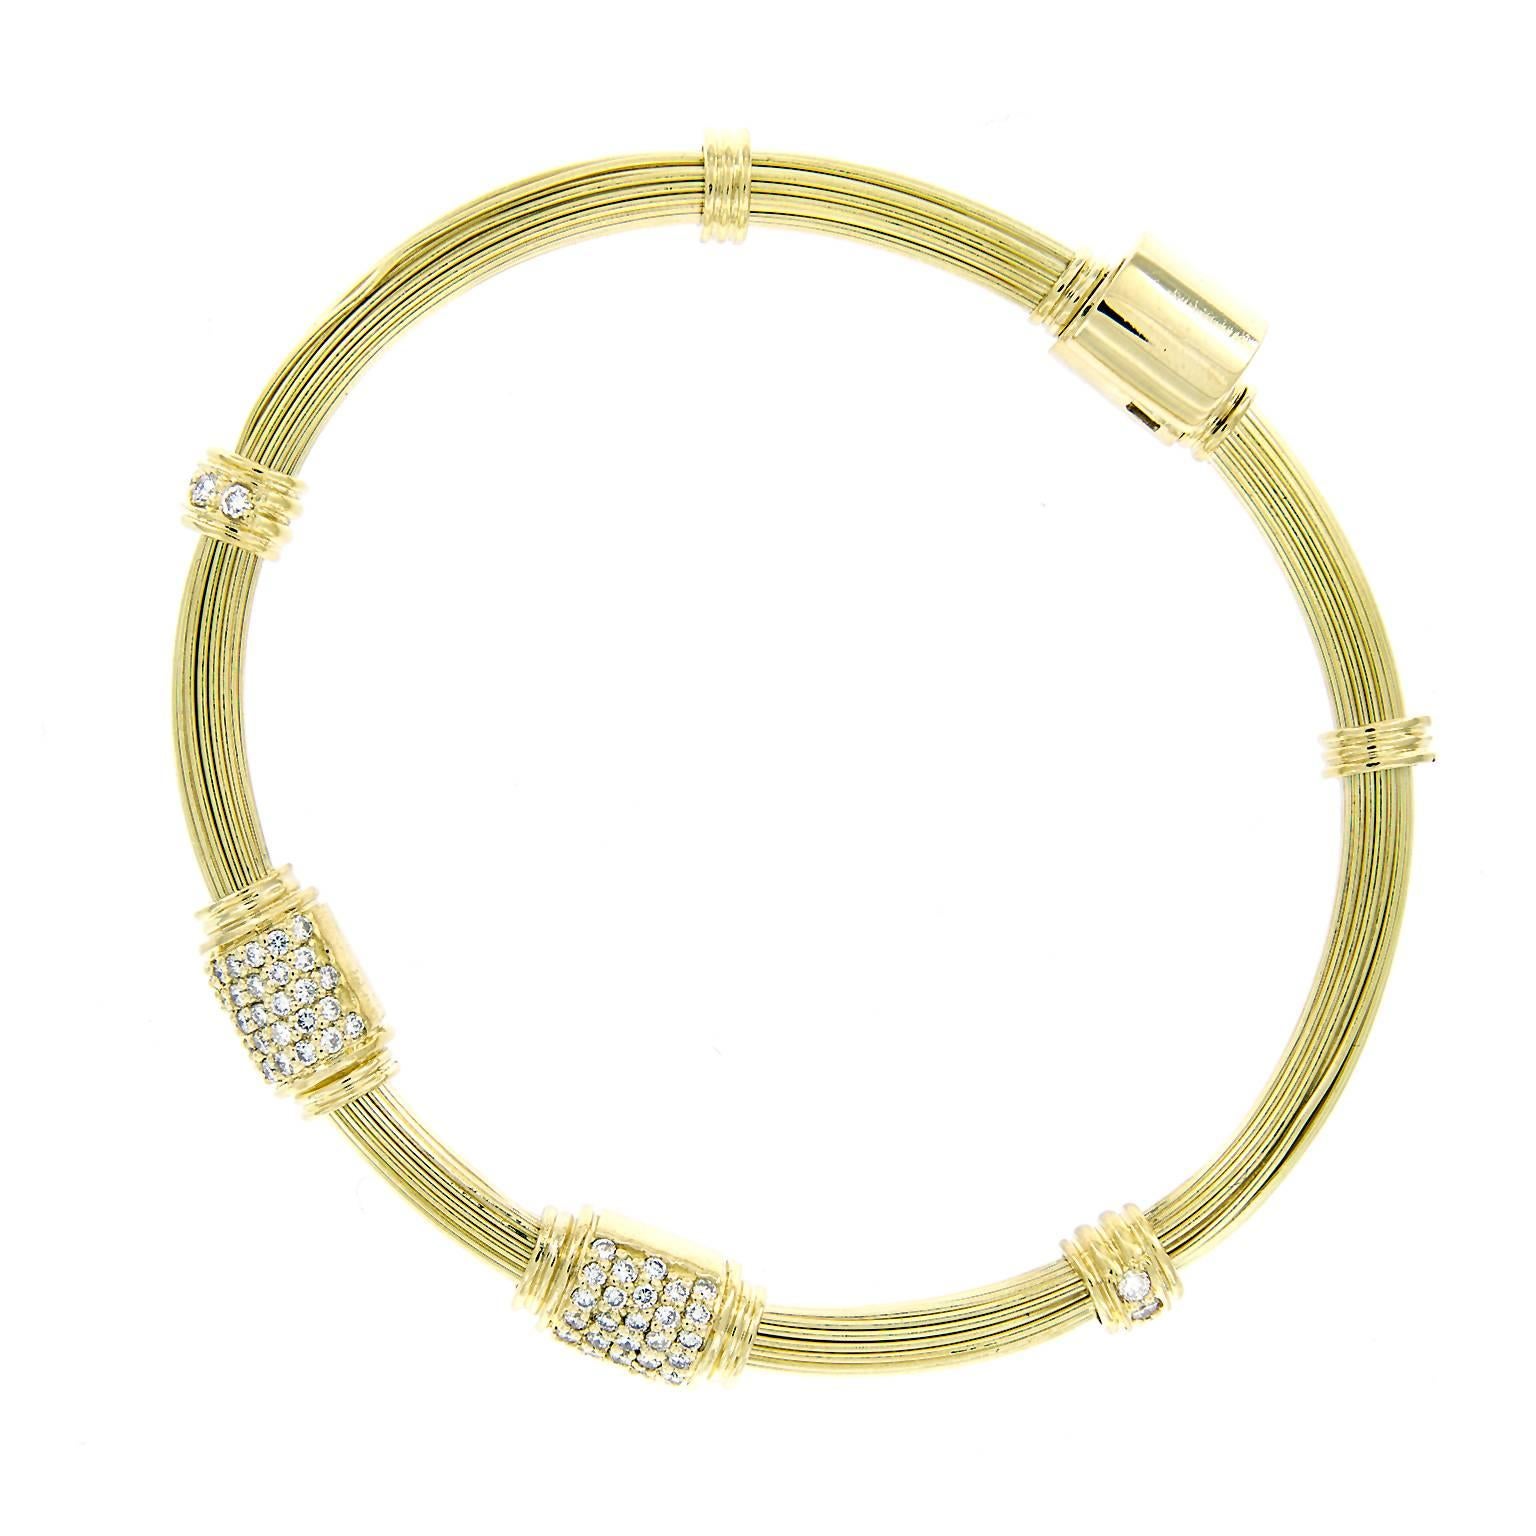 Beautiful 18k yellow gold version of the sought-after iconic elephant hair bangle, worn for good luck. Bracelet features two diamond accented knots. Hodden clasp with clamp over safety 

Inner Diameter 2.25 inches.
Diamonds 0.99 cttw VVS-VS F-G